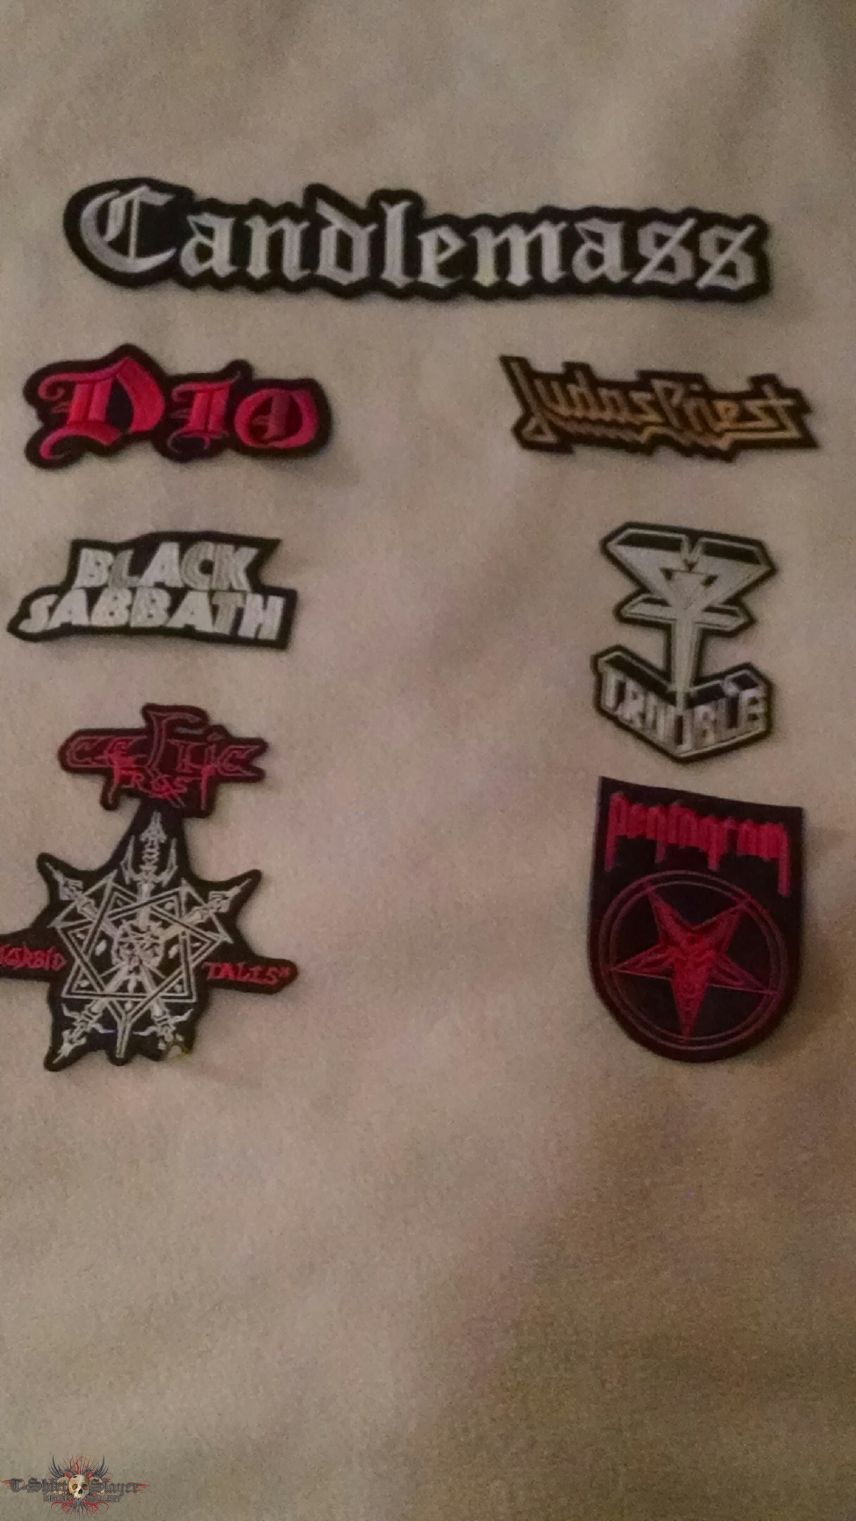 Candlemass Patches